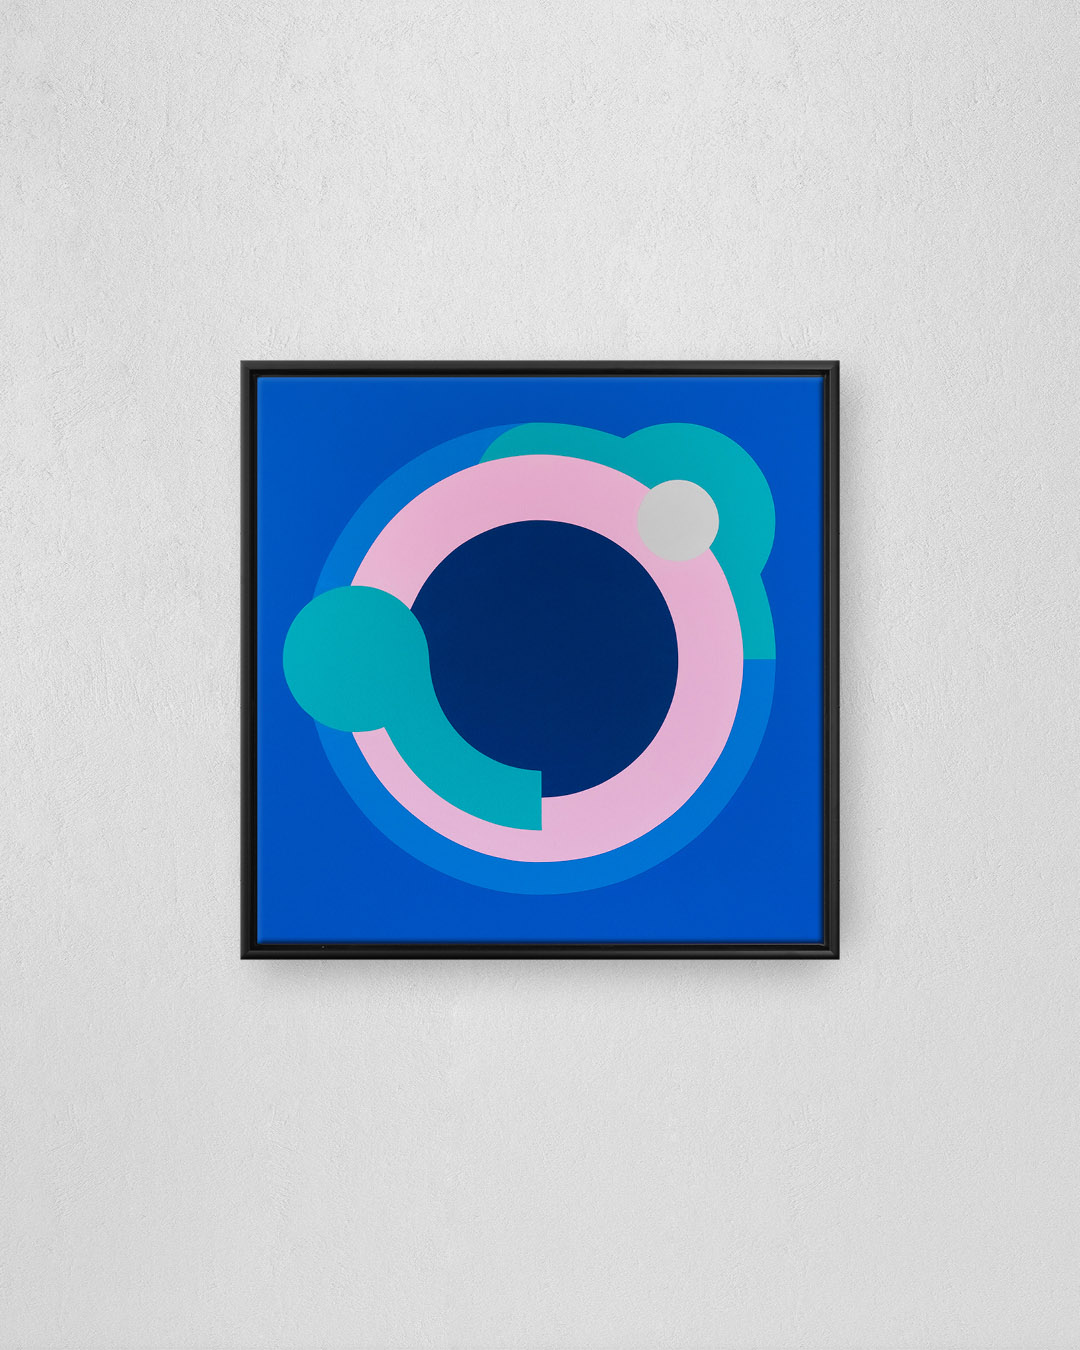 Divided circles, completed in 2019 with acrylic paints on a 70 x 70 cm canvas.